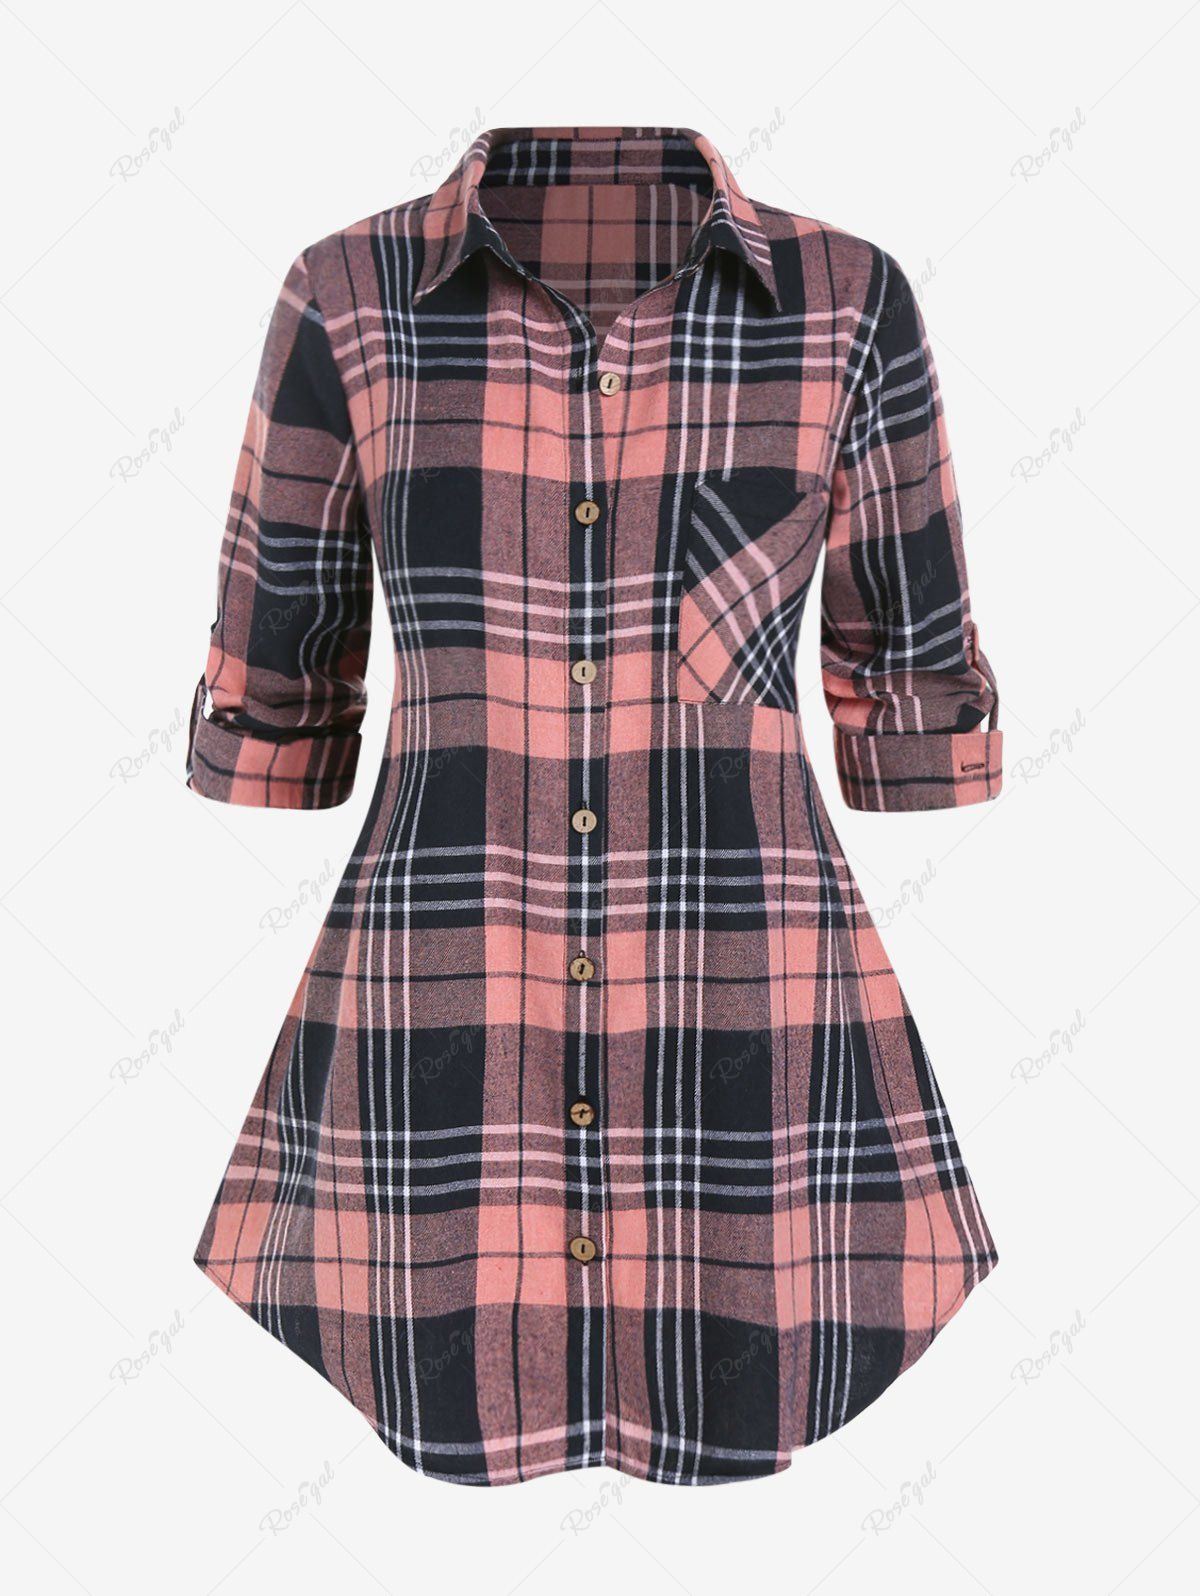 Fancy Plus Size Plaid Roll Tab Sleeves Shirt with Pocket  